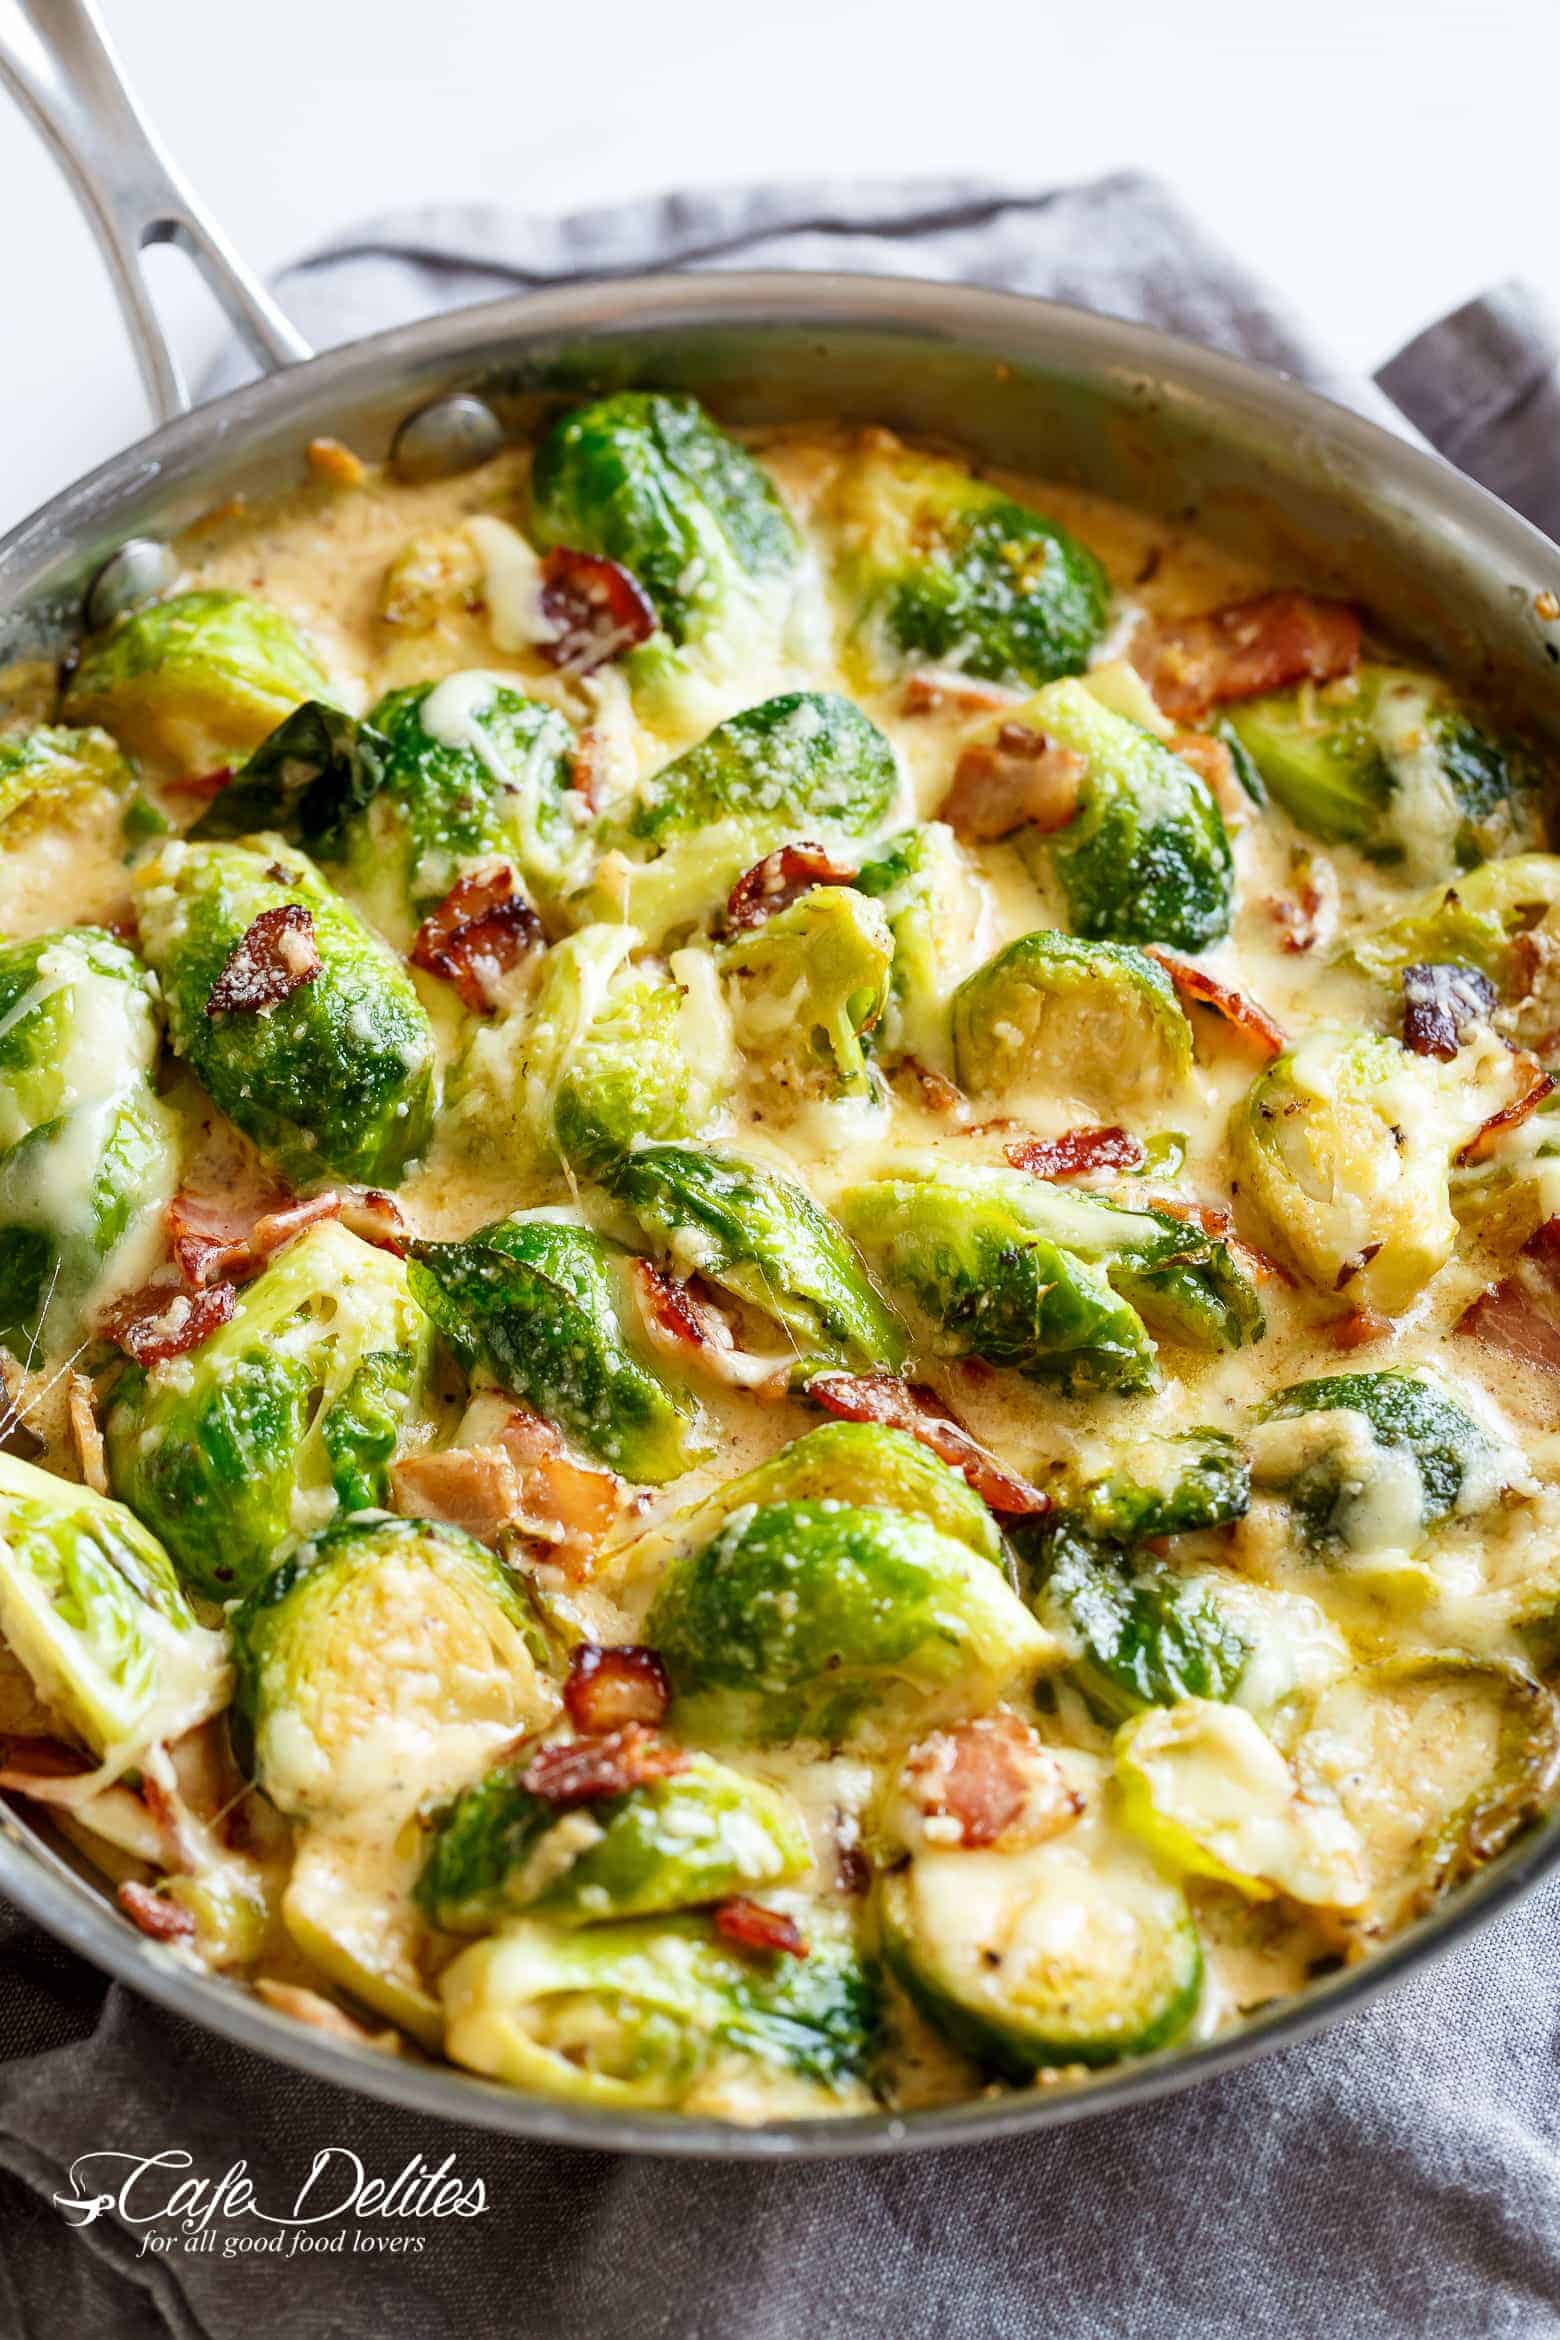 Creamy Garlic Parmesan Brussels Sprouts & Bacon will become your NEW favourite way to eat Brussels Spouts! Pan fried Brussels sprouts and bacon baked in a cheesy creamy garlic sauce, and topped with bubbling mozzarella and parmesan cheese!